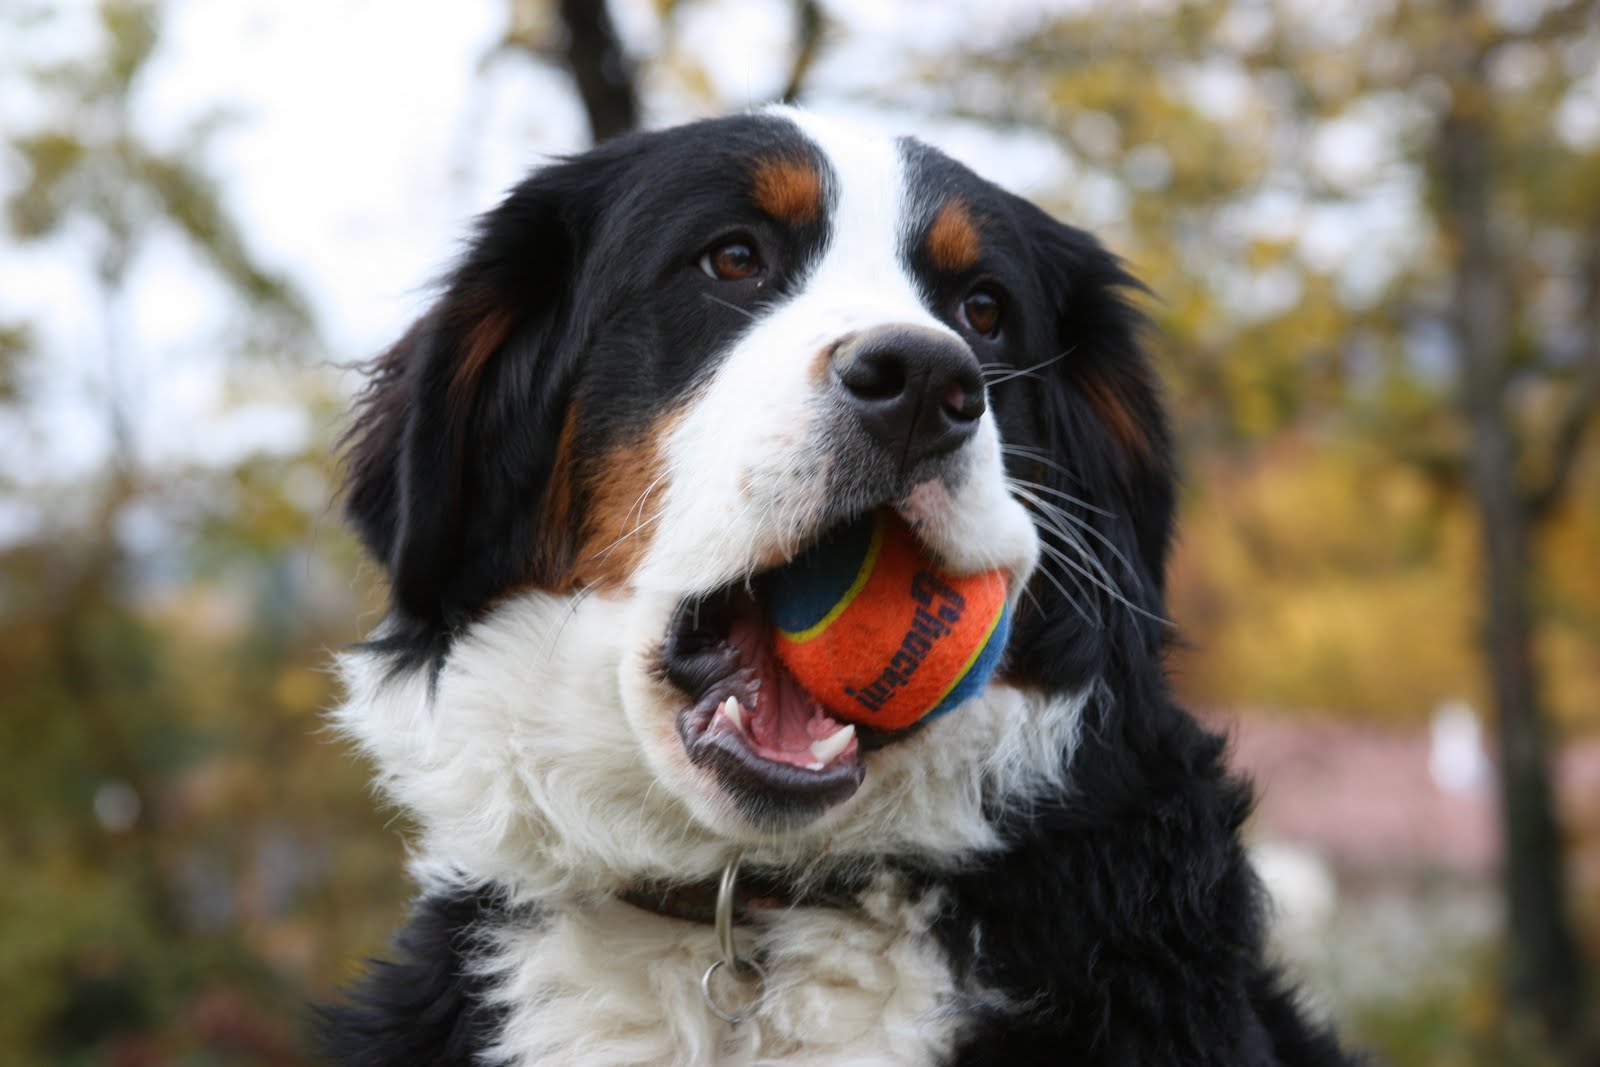 Bernese Mountain Dog with his toy photo and wallpaper. Beautiful